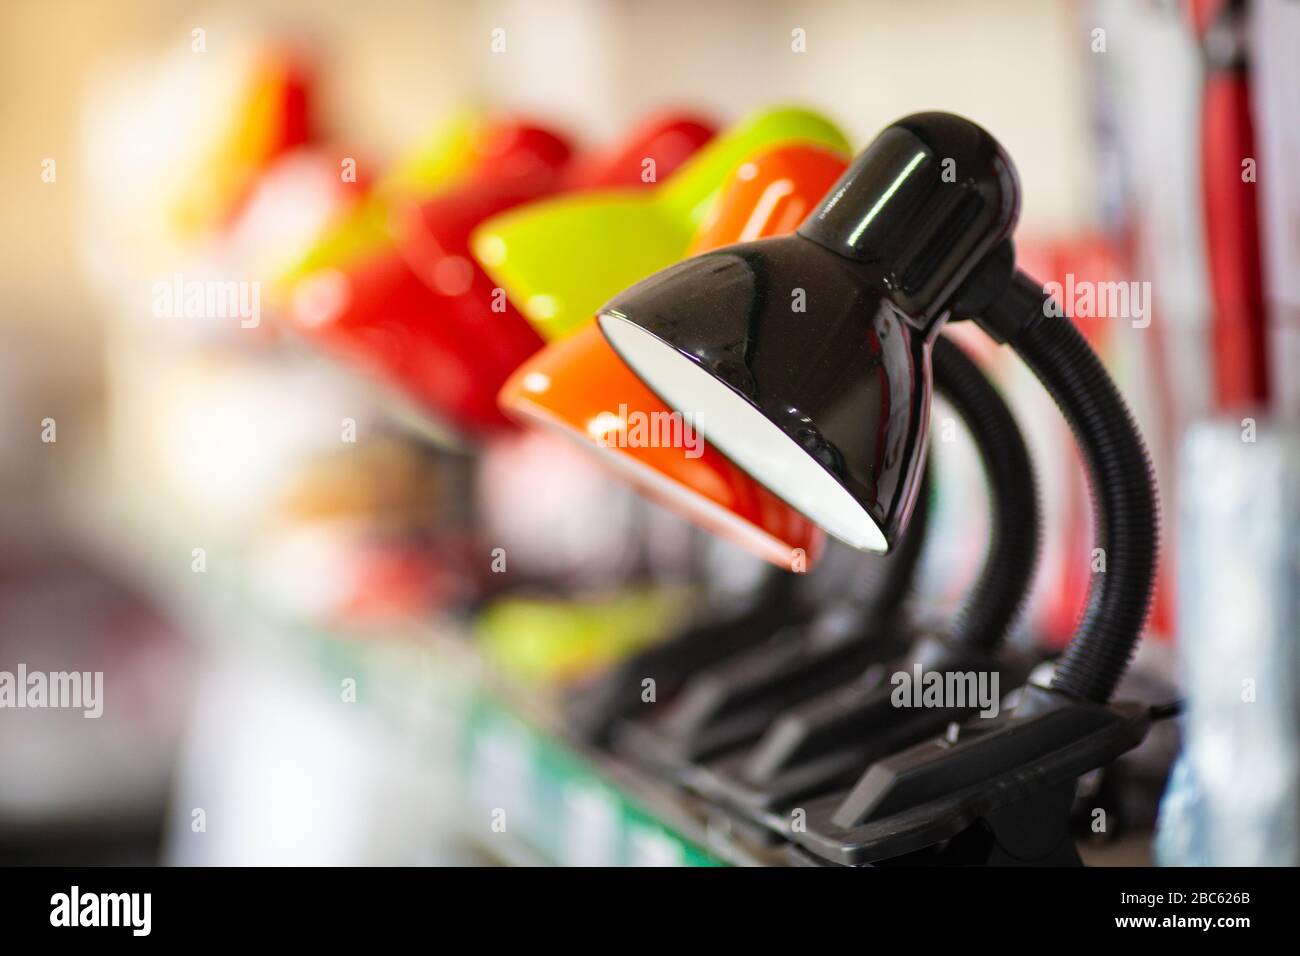 Small simple desk lamps on hardware store or electronics shop shelf Stock Photo